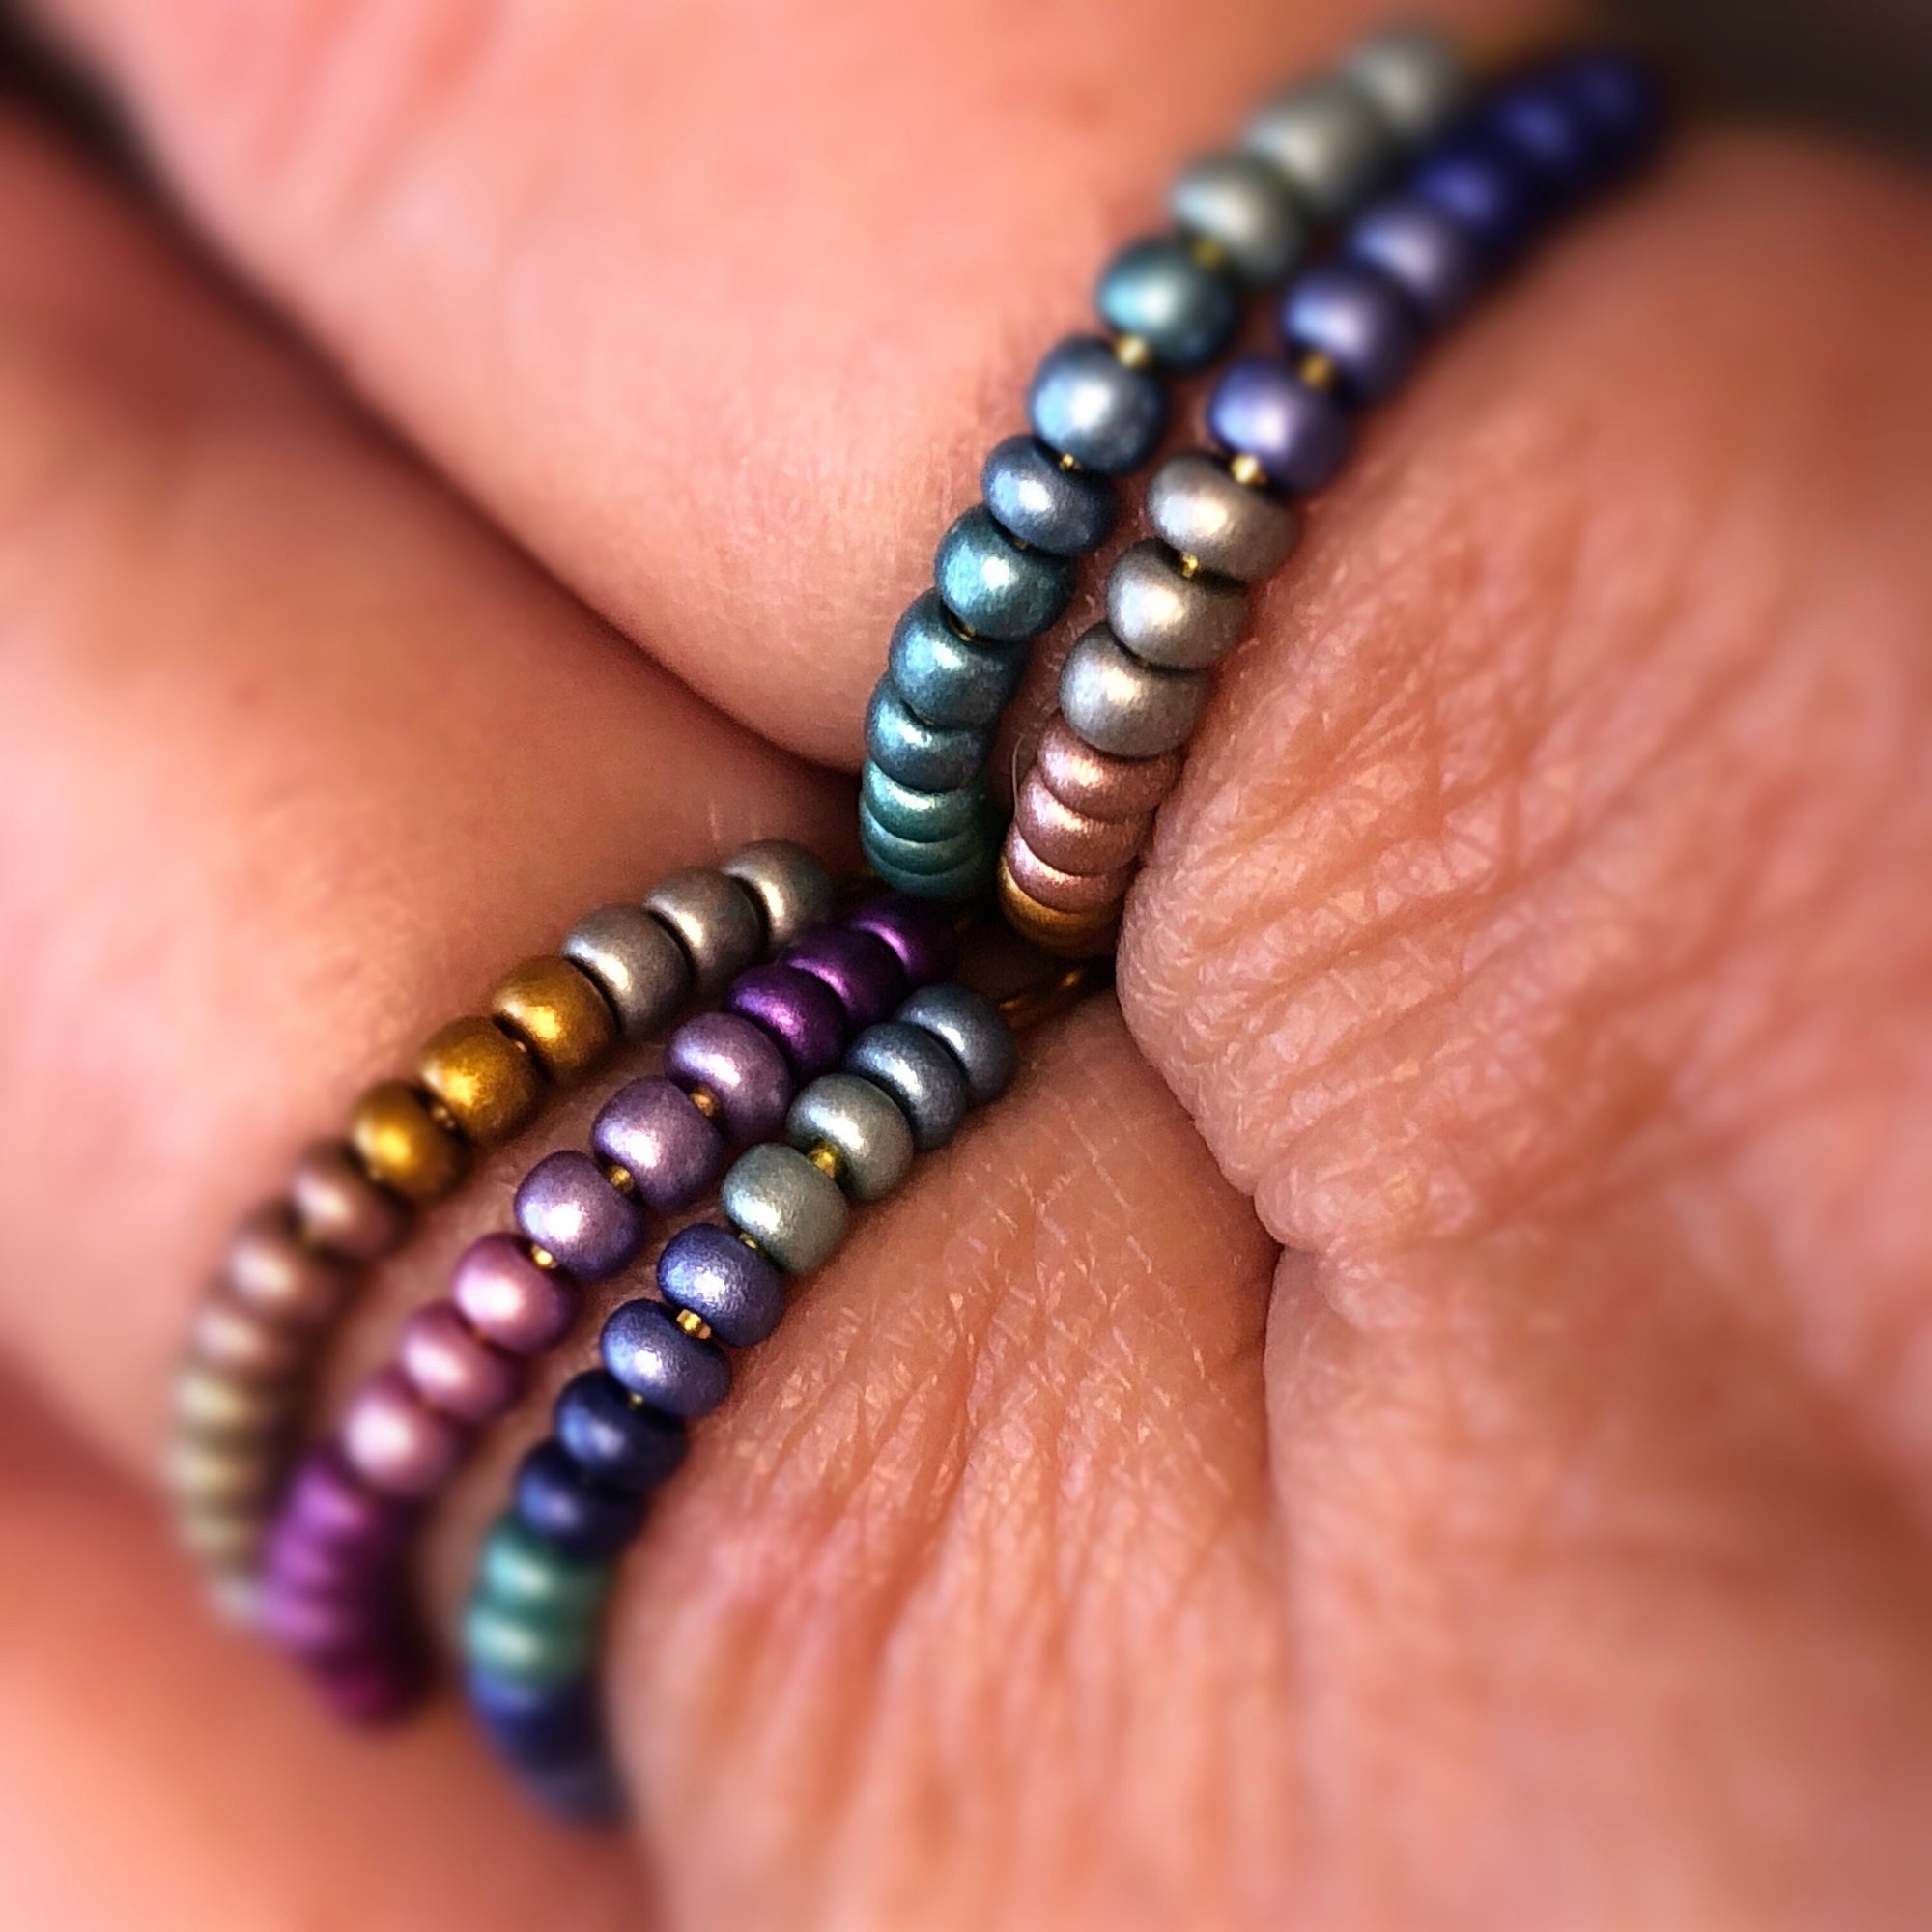 Set of 2 adjustable rainbow spinner ring • Stacking rings with colored beads anxiety ring • Fidget ring Spinning ring Worry ring • 24 colors